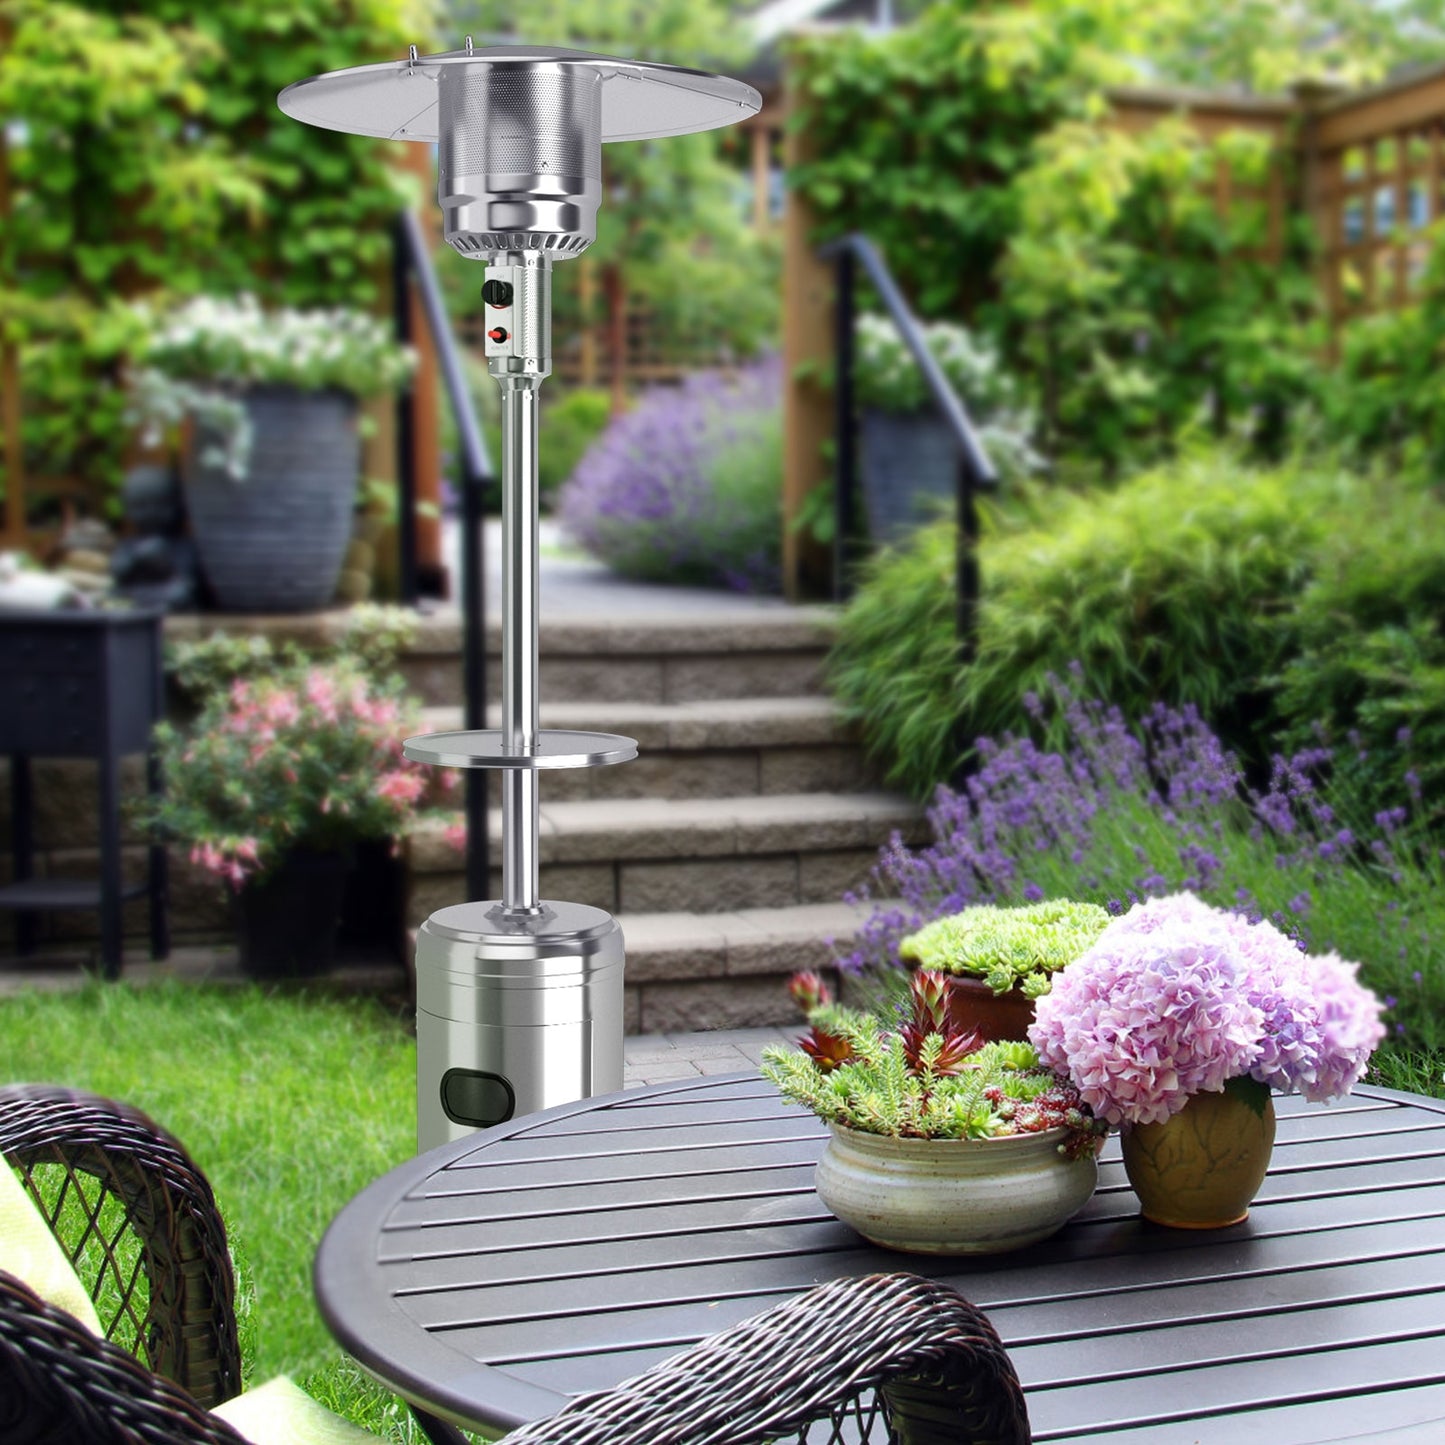 48,000 BTU Standing Outdoor Heater Propane LP Gas Steel with Table and Wheels - Gallery Canada